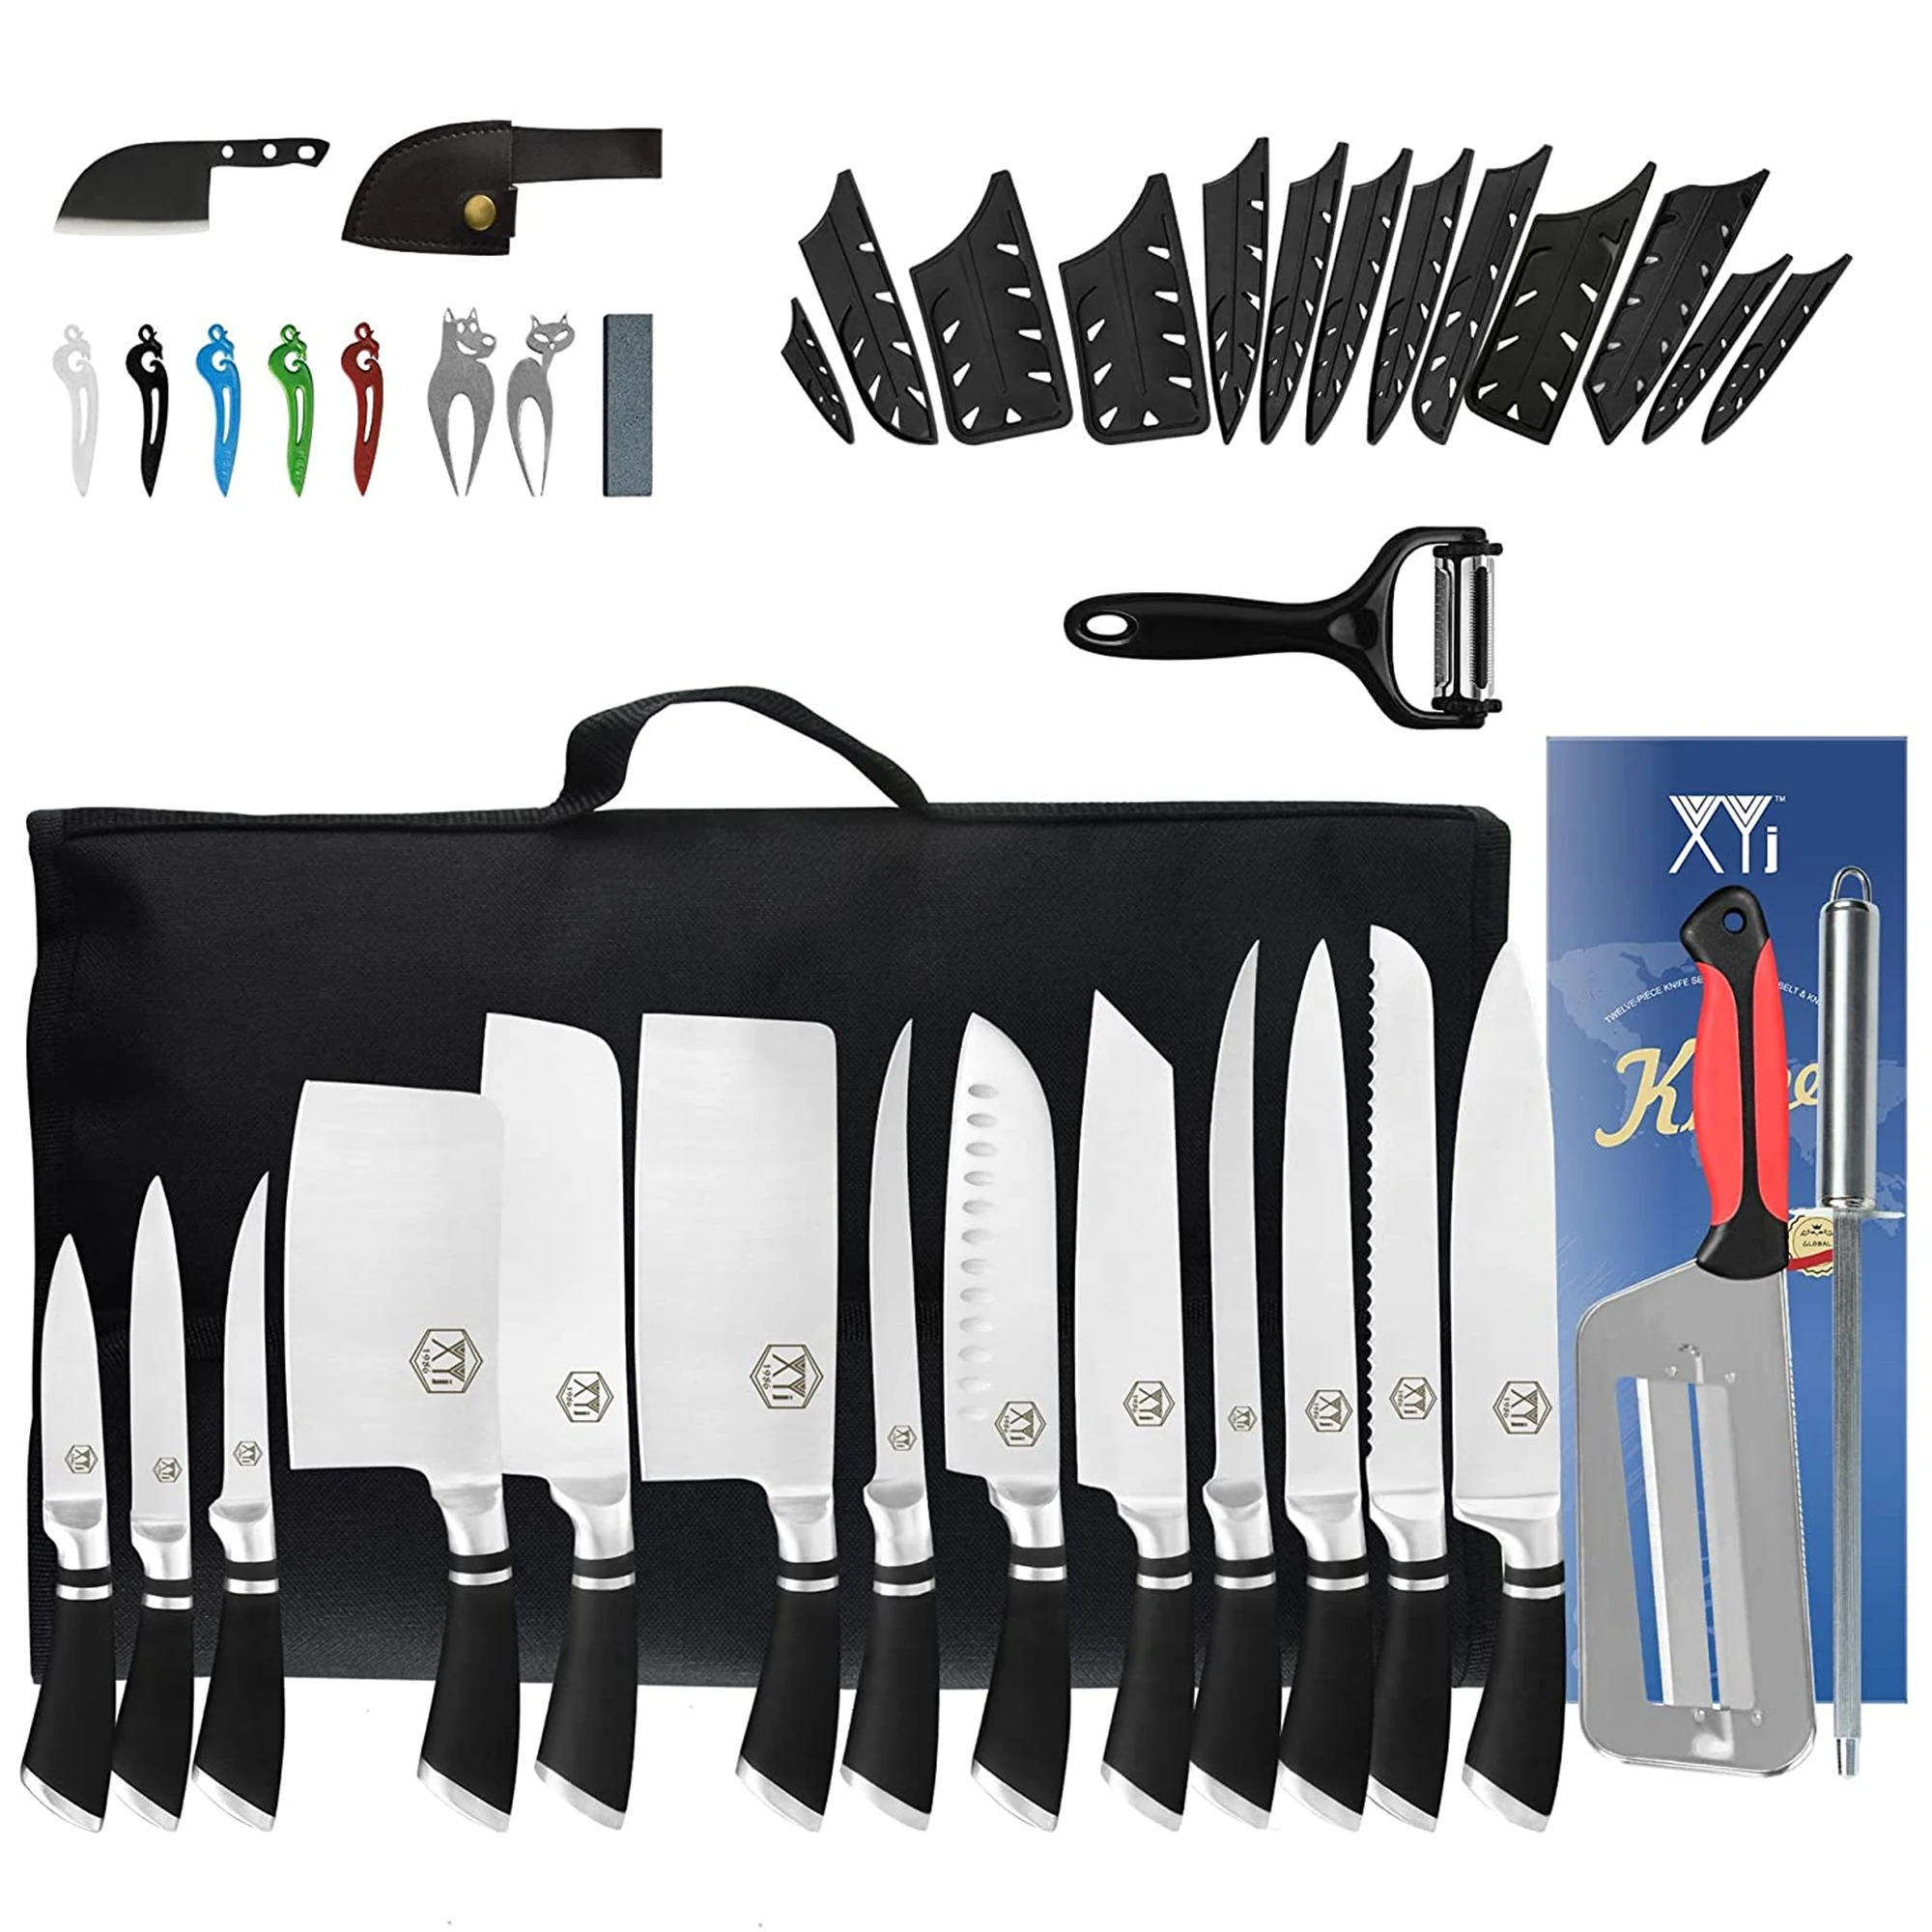 

XYj Stainless Steel Knives Tool Kit 11 Pieces Cleaver Chef Slicing Bread Slicing Santoku Nakiri Cooking Utility Paring Knife Set